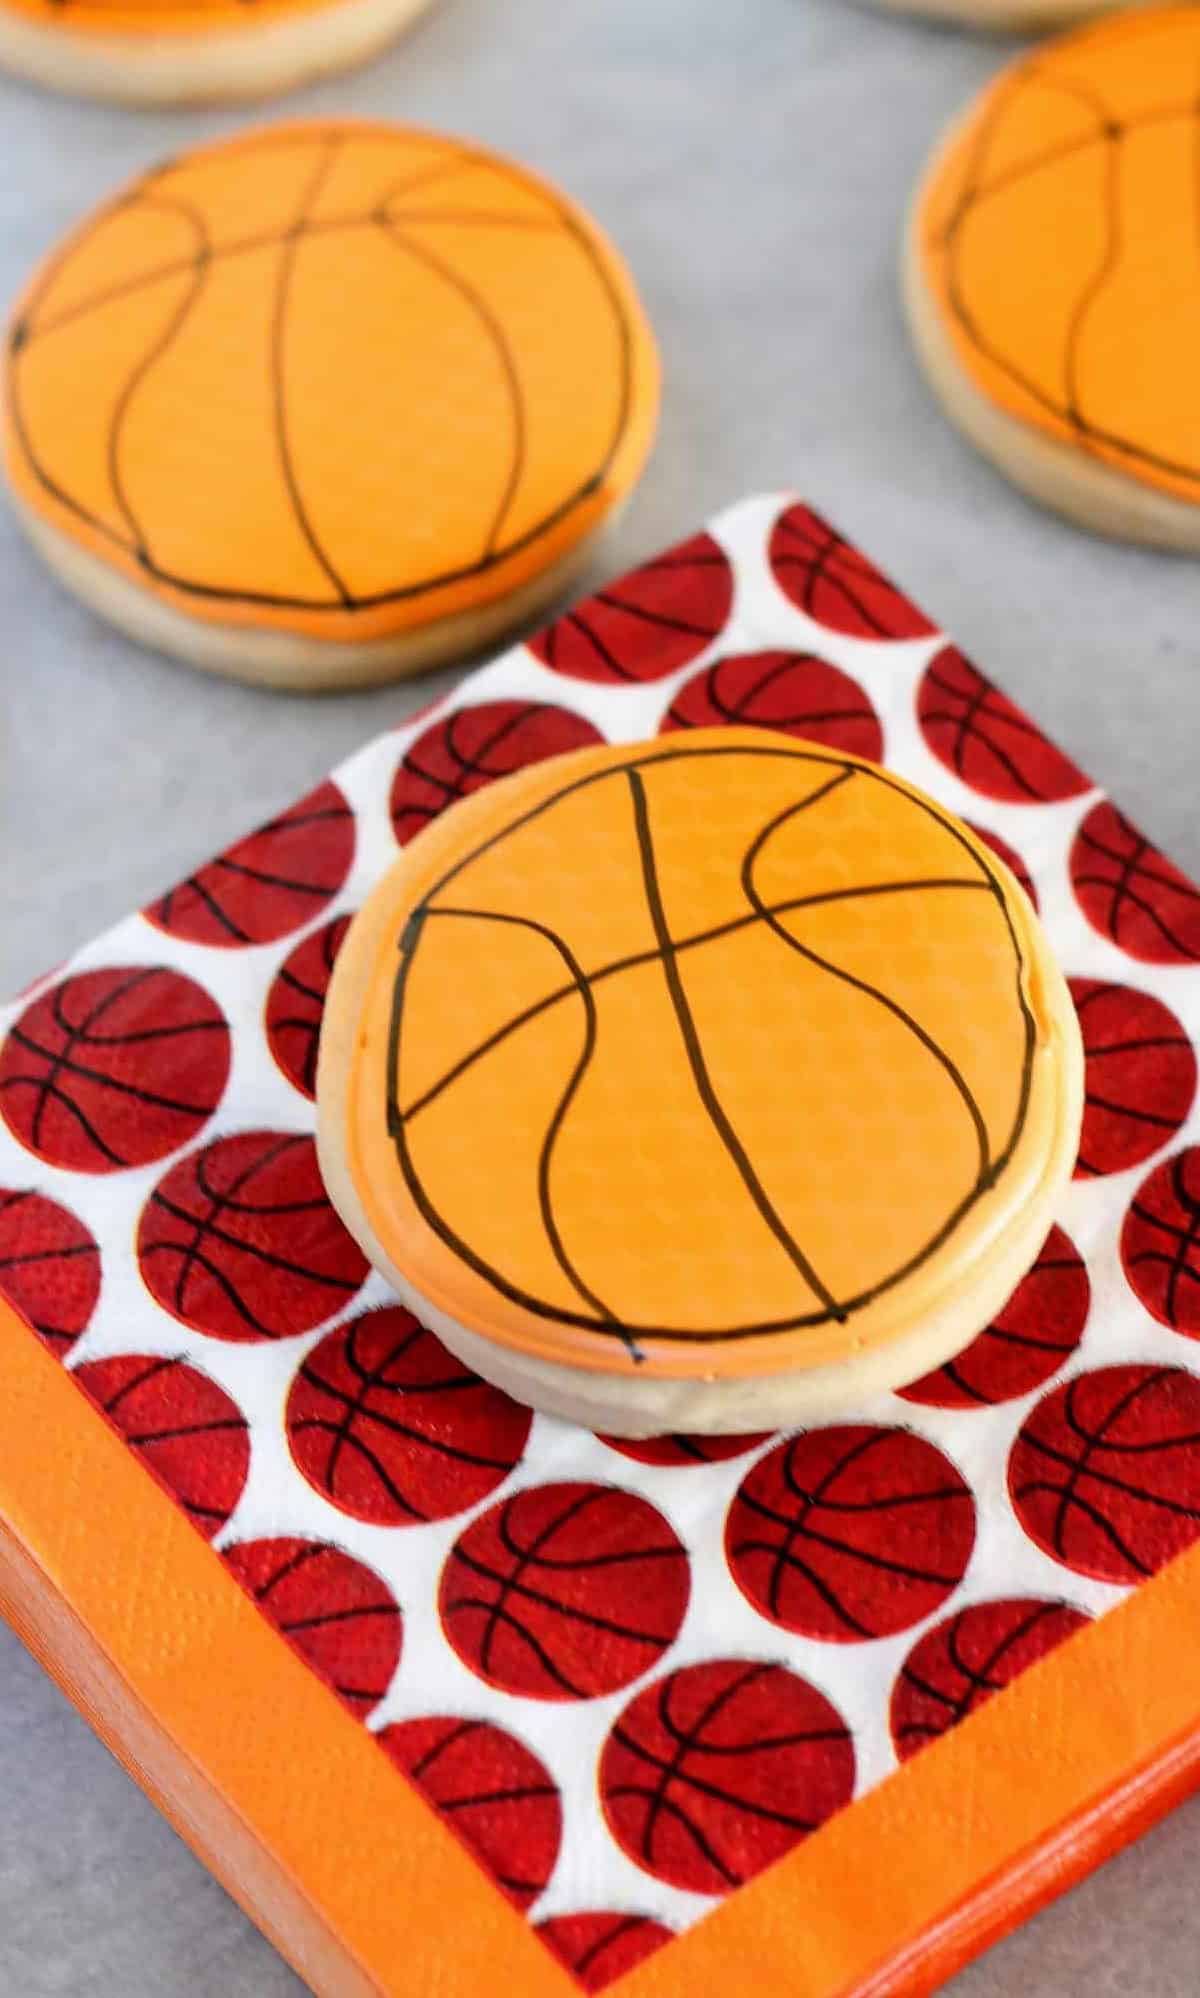  These cookies are guaranteed to score big with your friends and family.